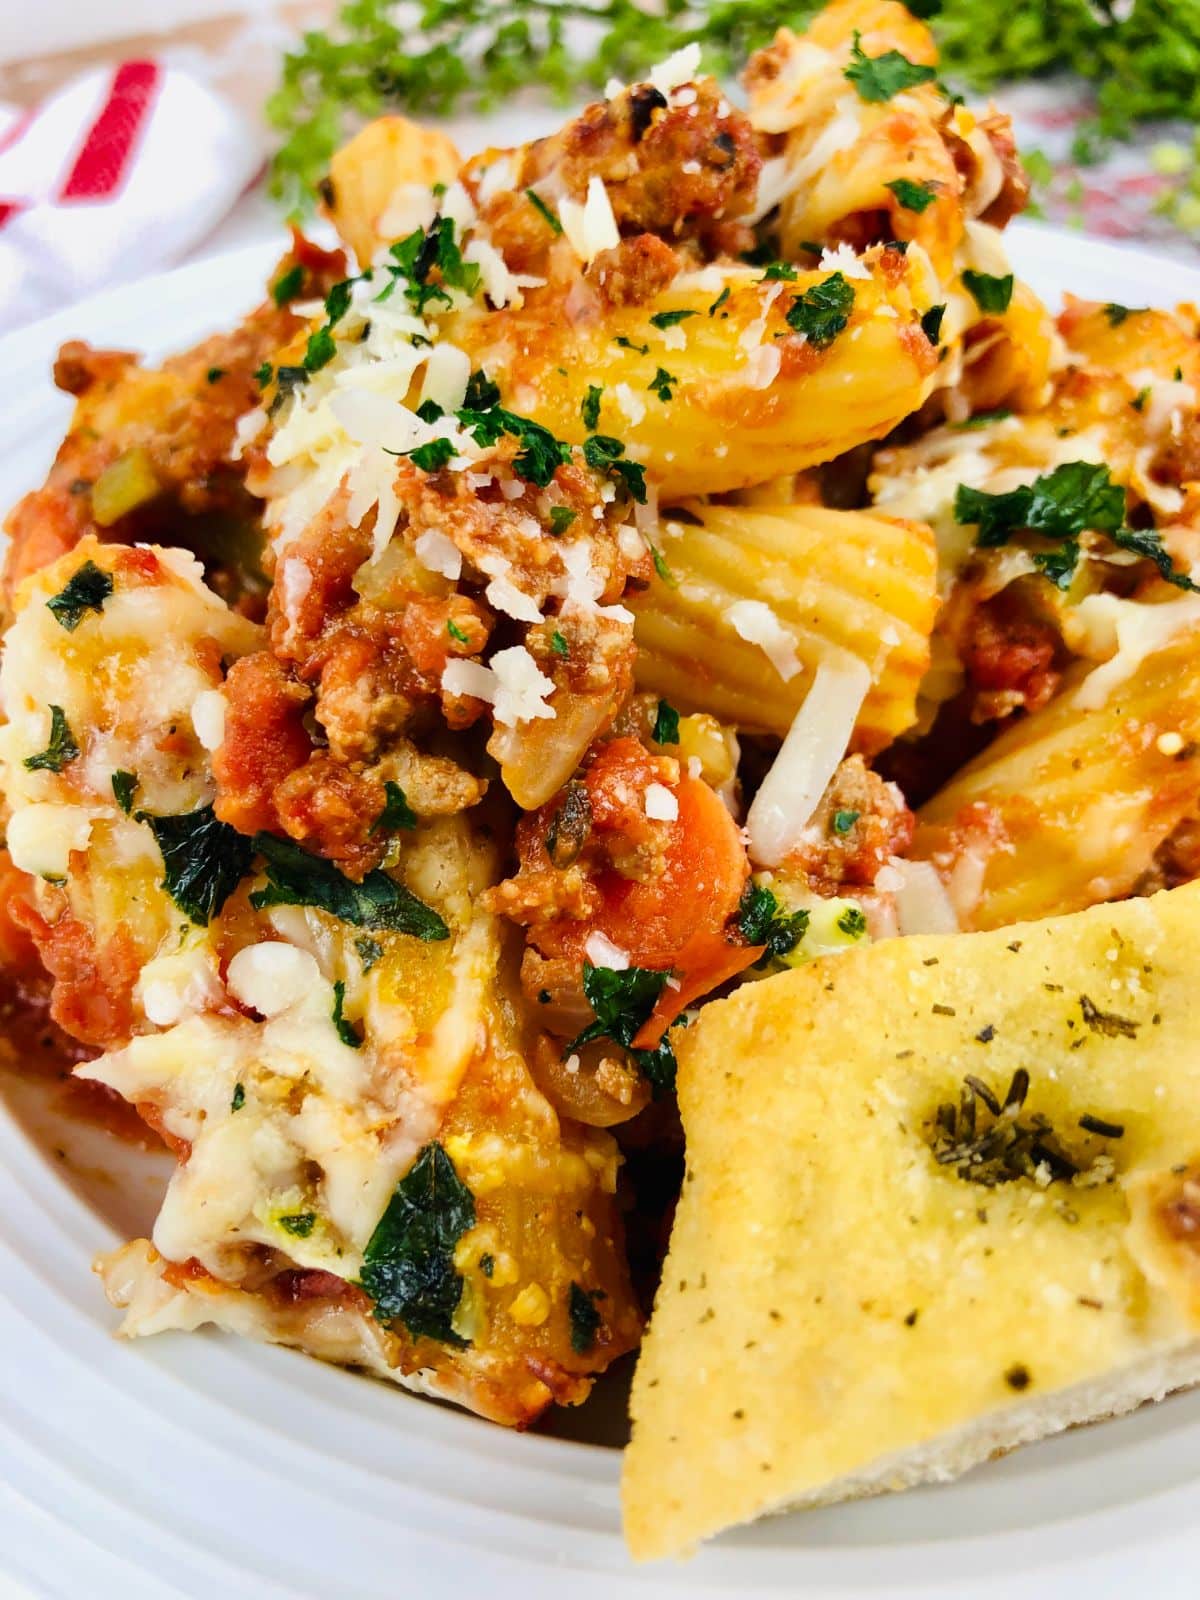 Baked Rigatoni with Meat Sauce on a serving plate with garlic bread on the side.